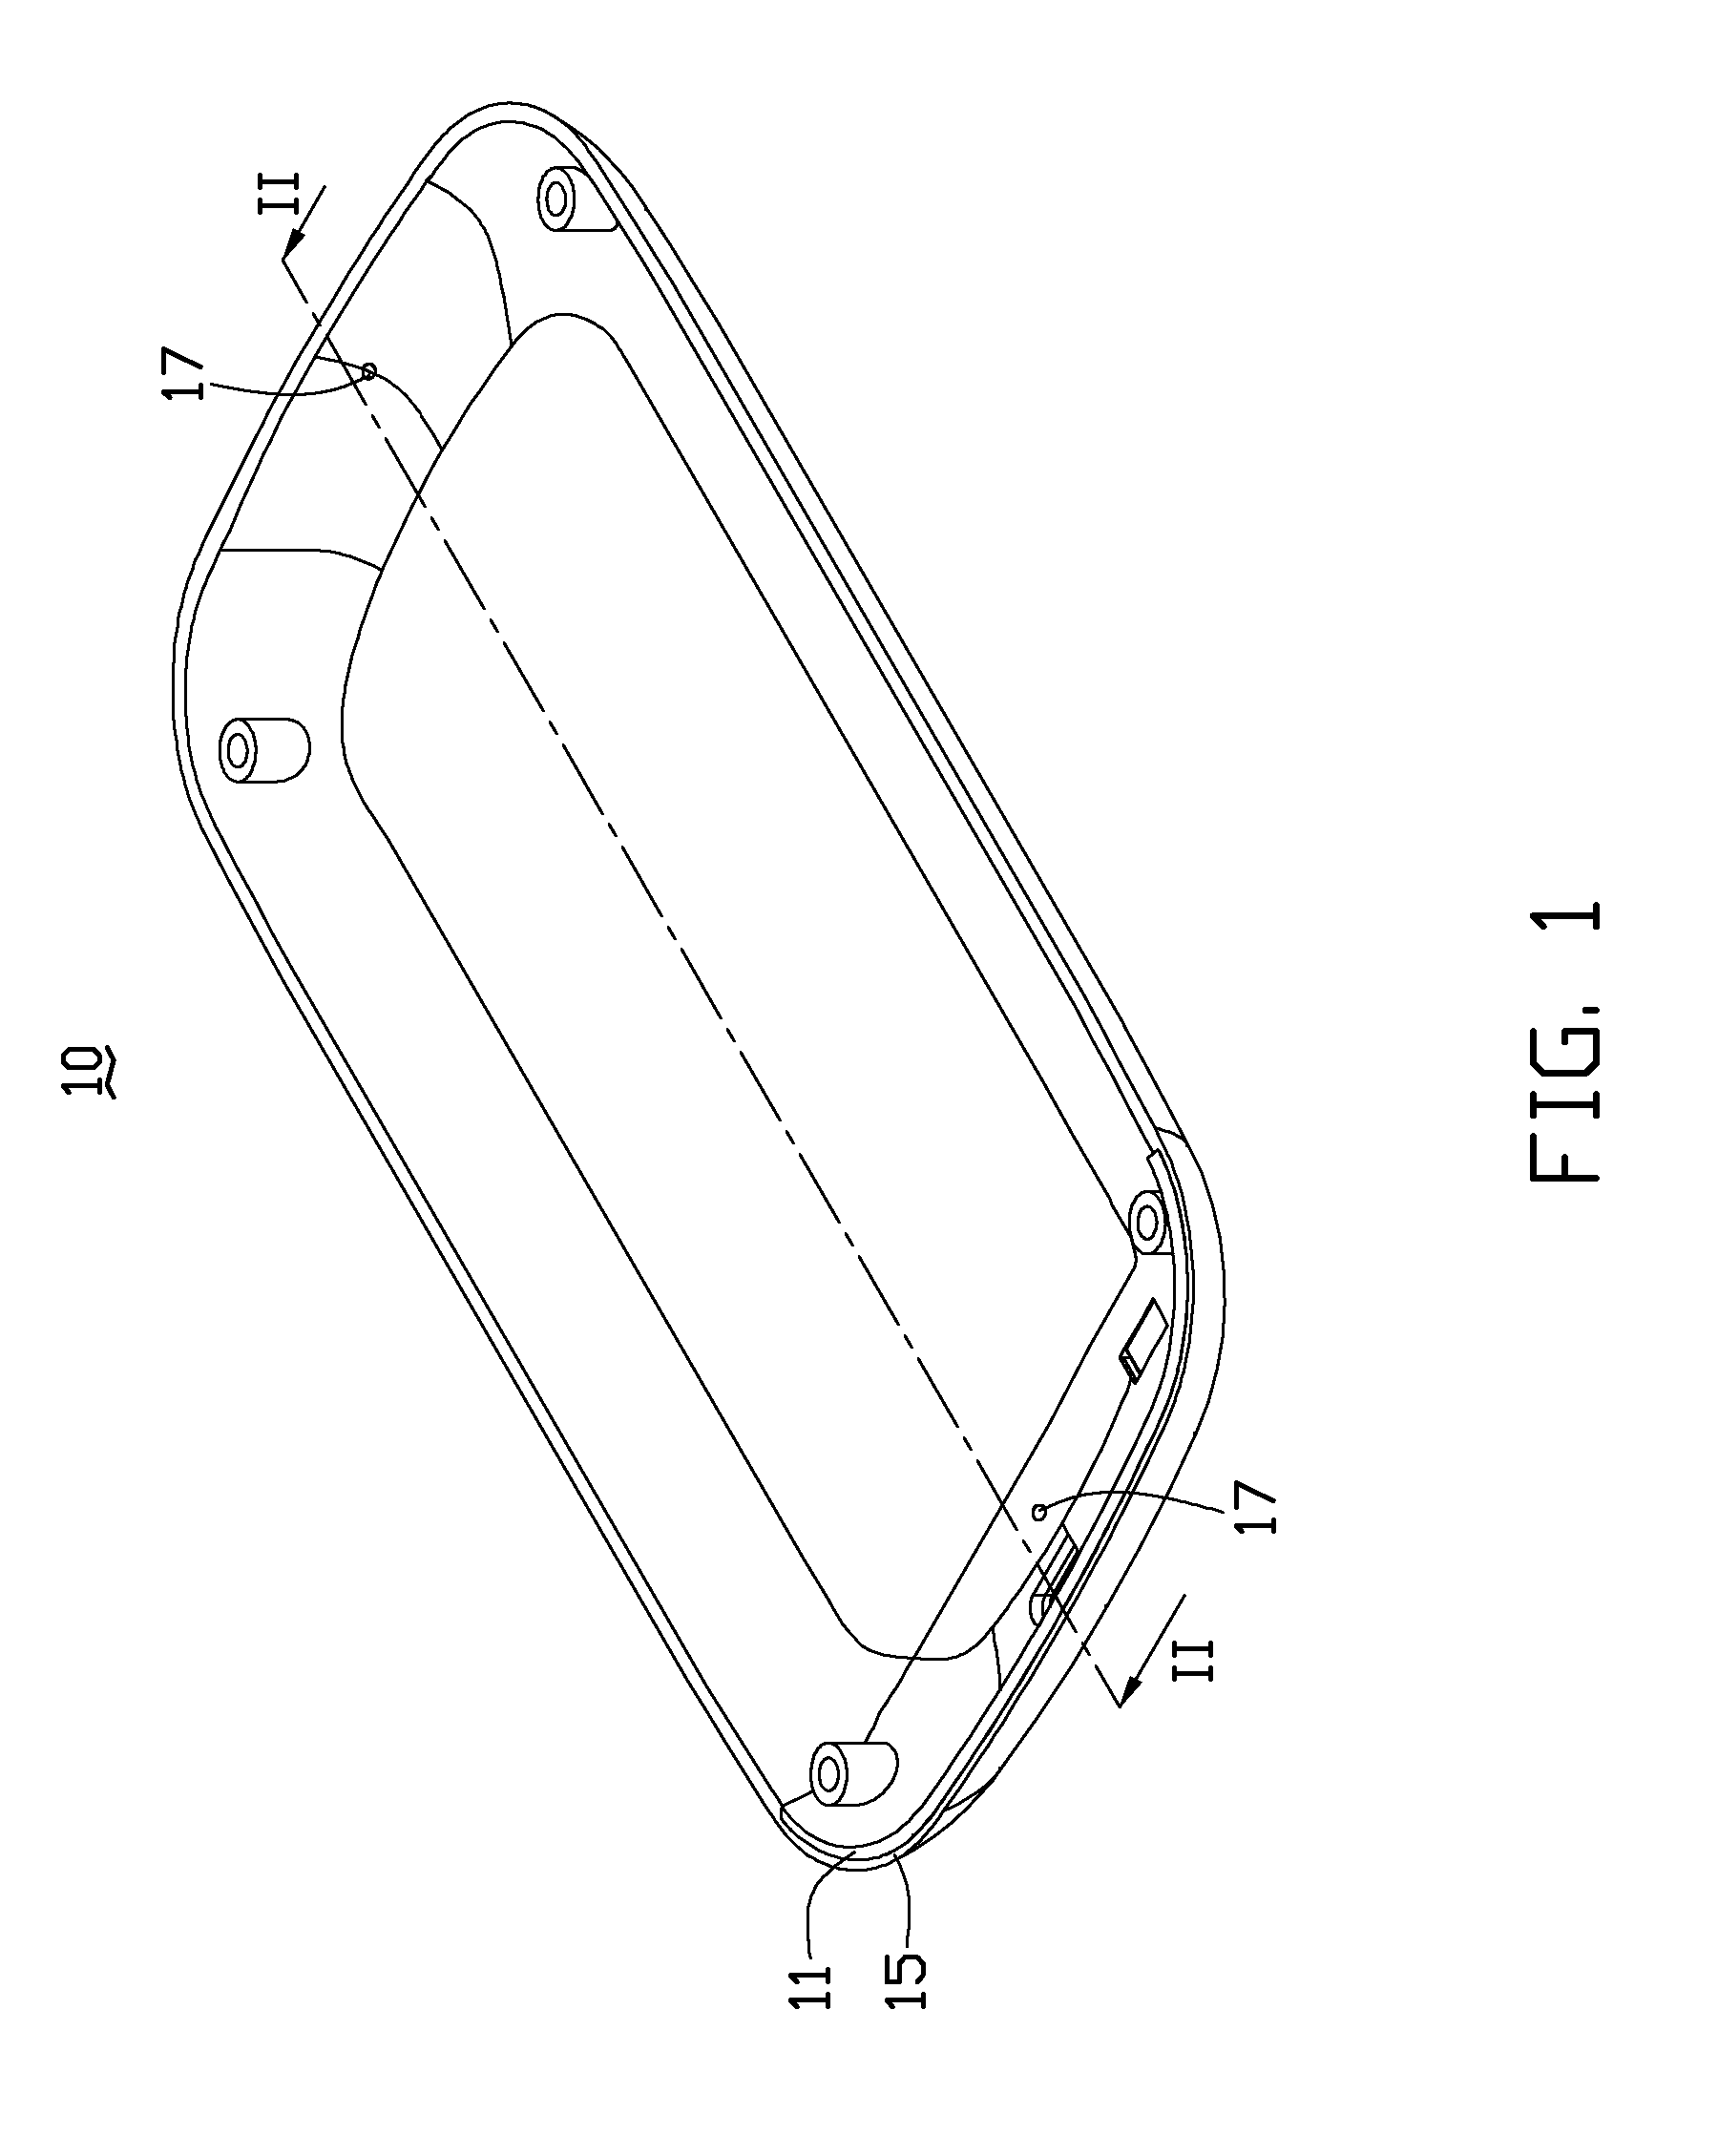 Housing of portable electronic device and method for making the same